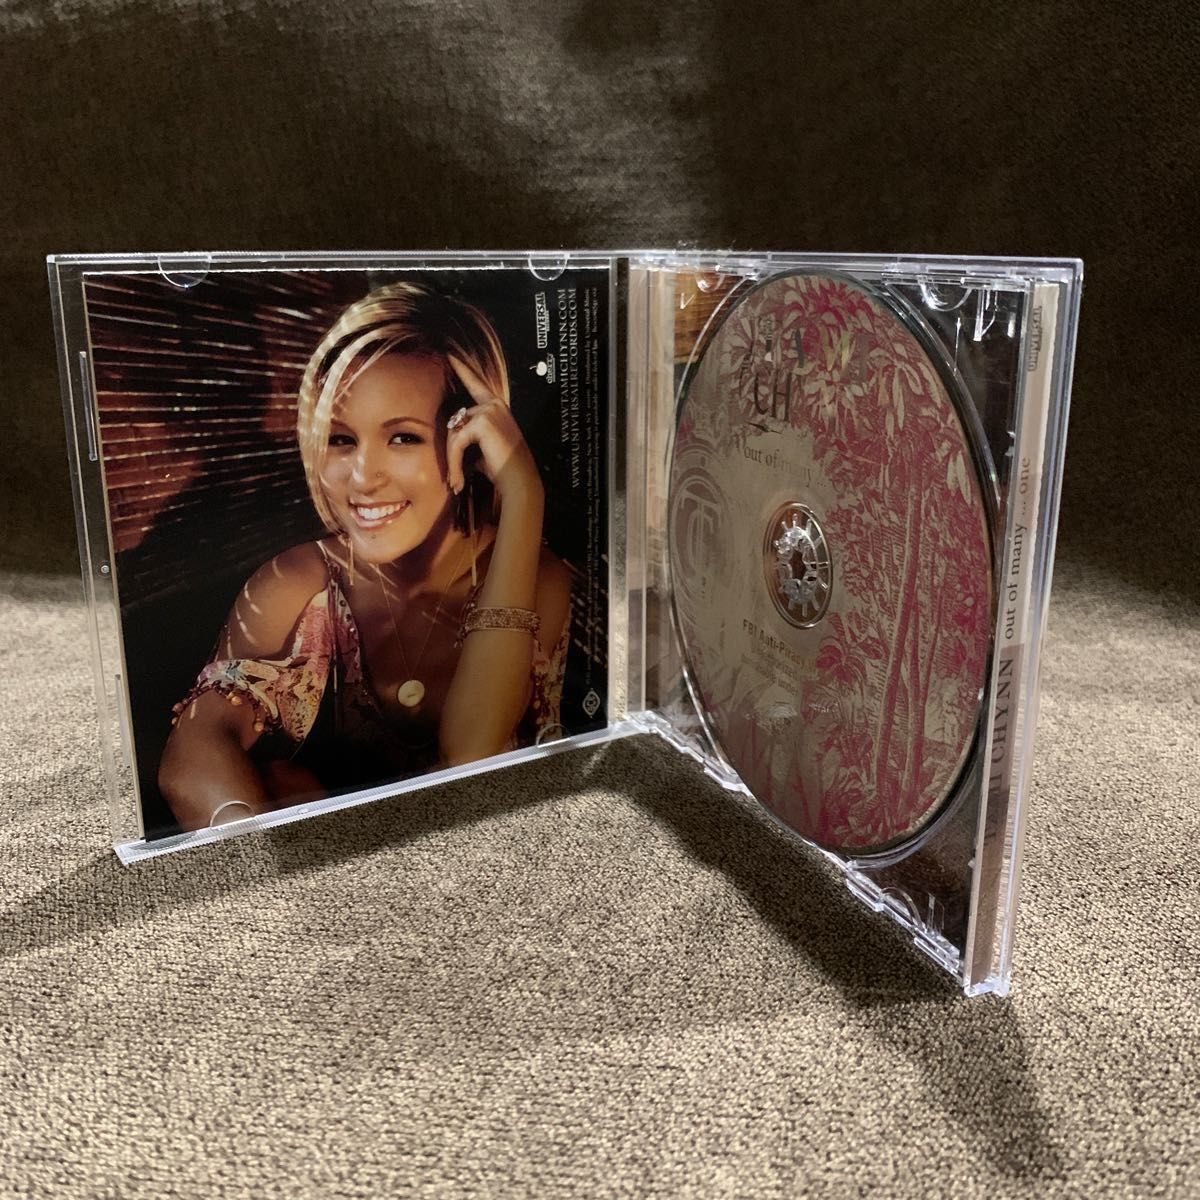 (CD) TAMI CHYNN/out of many...one (輸入盤) (管理J3788)wolf Lion monkey